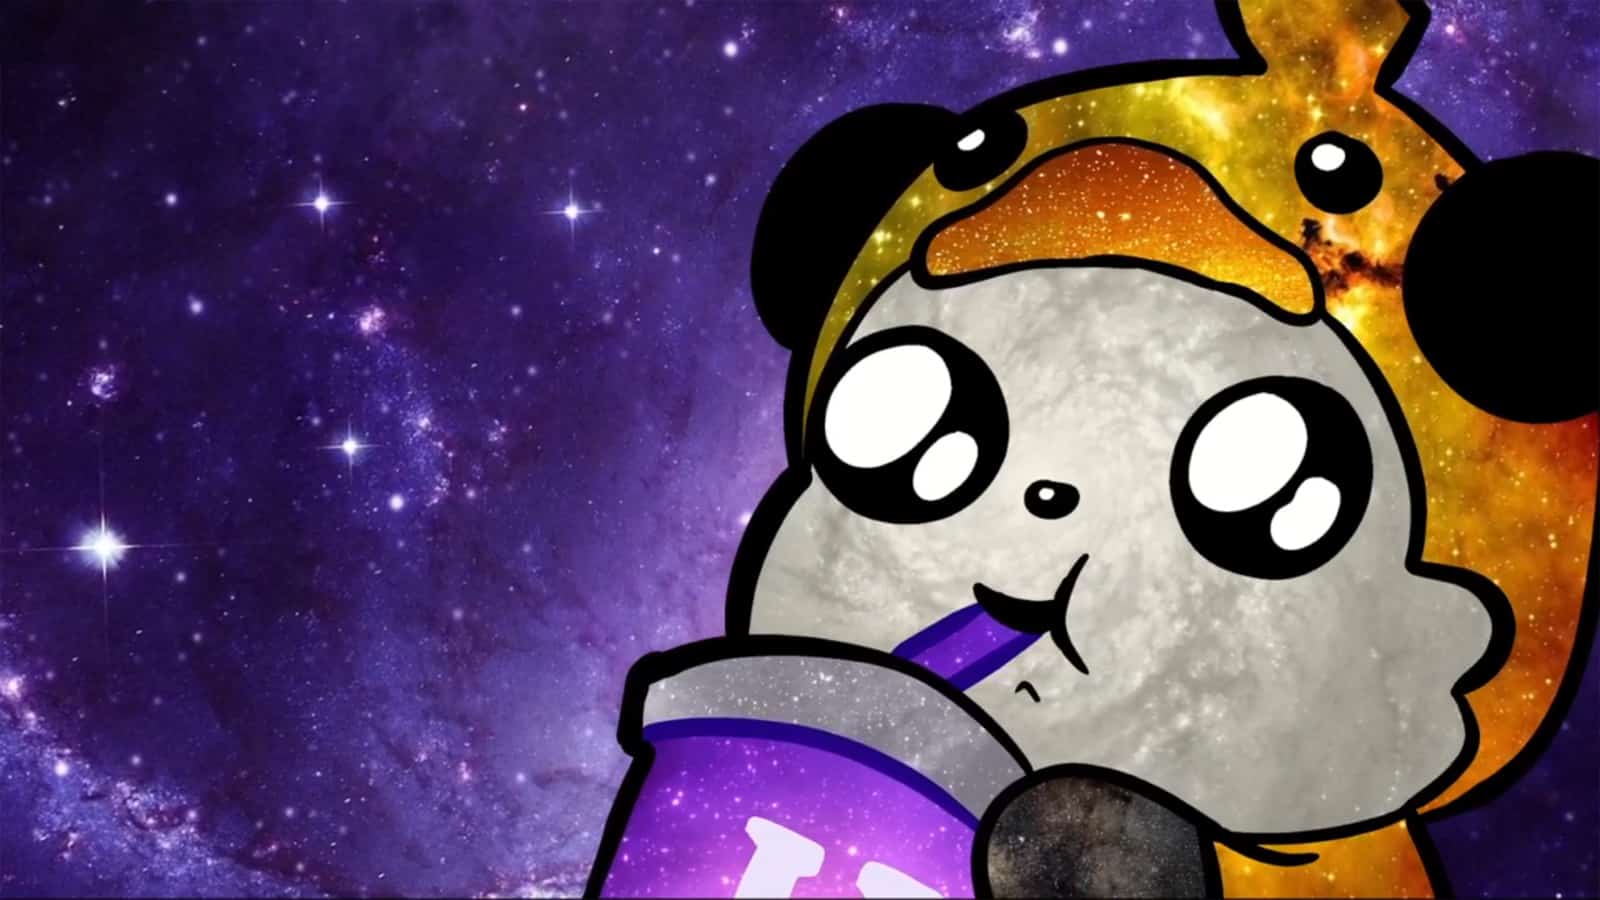 AdmiralBahroo emote of panda drinking from straw on starry background